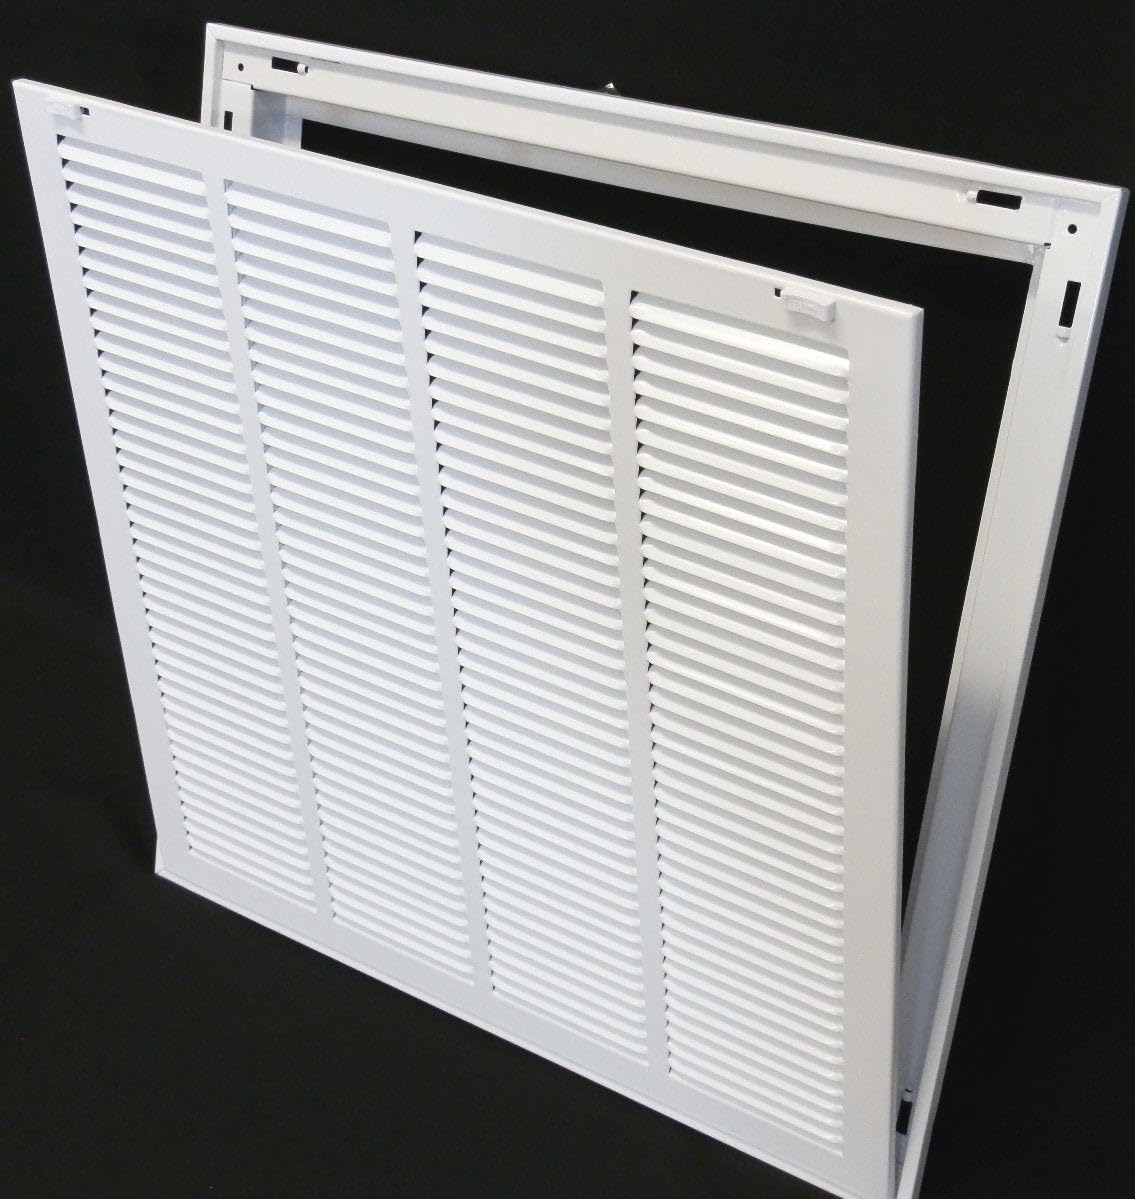 20&quot; X 16&quot; Steel Return Air Filter Grille for 1&quot; Filter - Removable Frame - [Outer Dimensions: 22 5/8&quot; X 18 5/8&quot;]